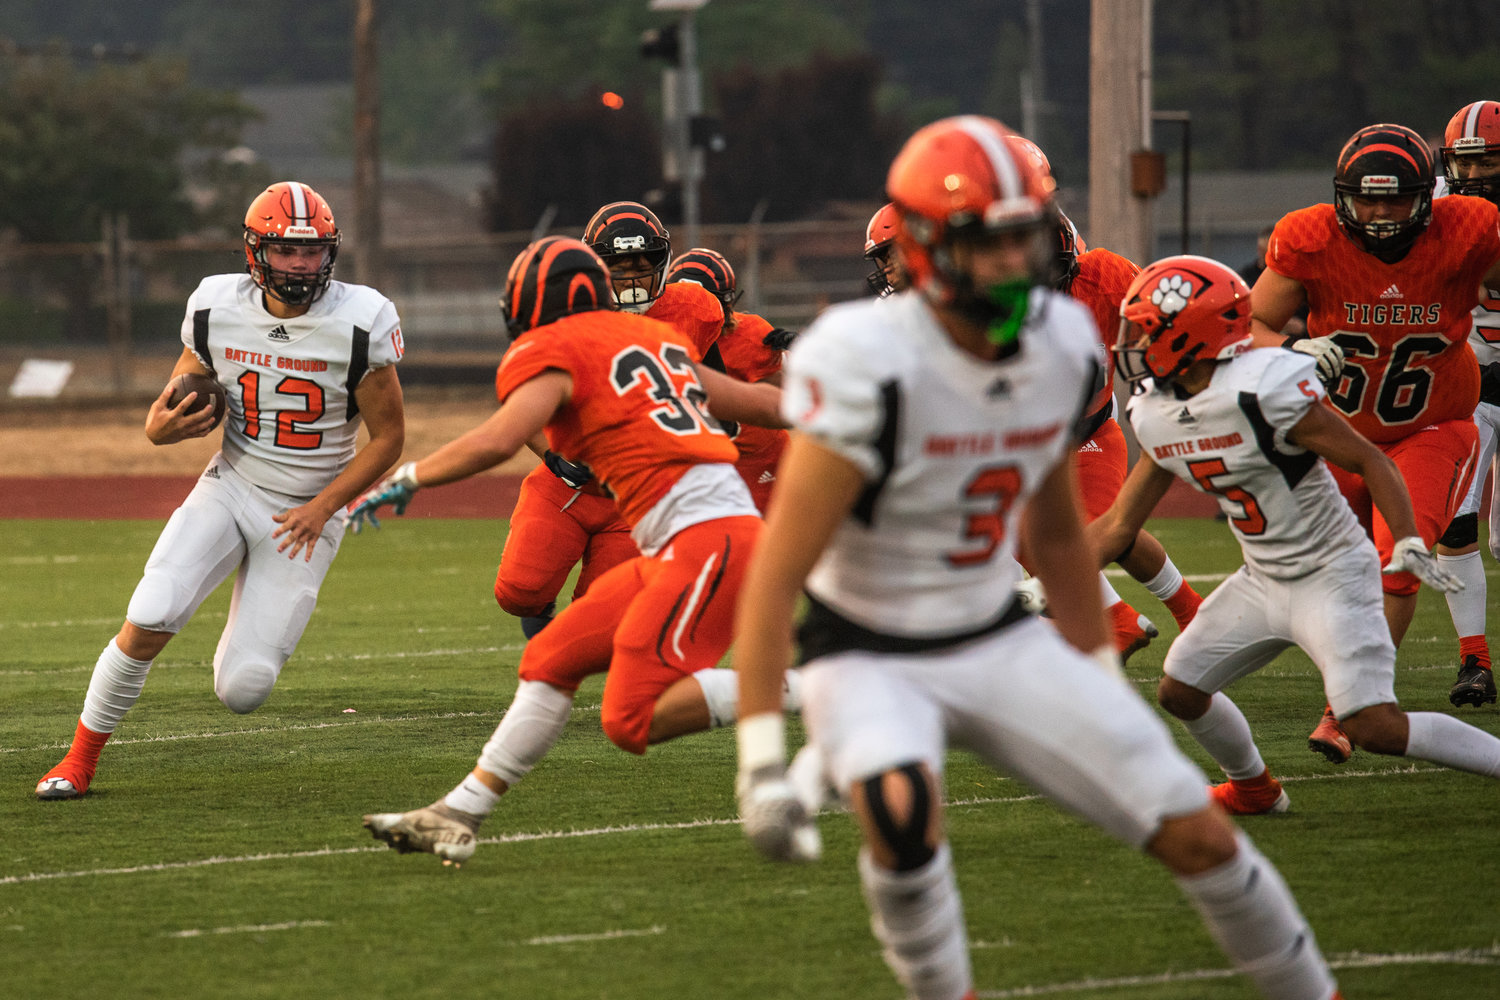 Battle Ground quarterback Kameron Spencer carries the ball up the field through Centralia’s defense during an away game on Friday night.